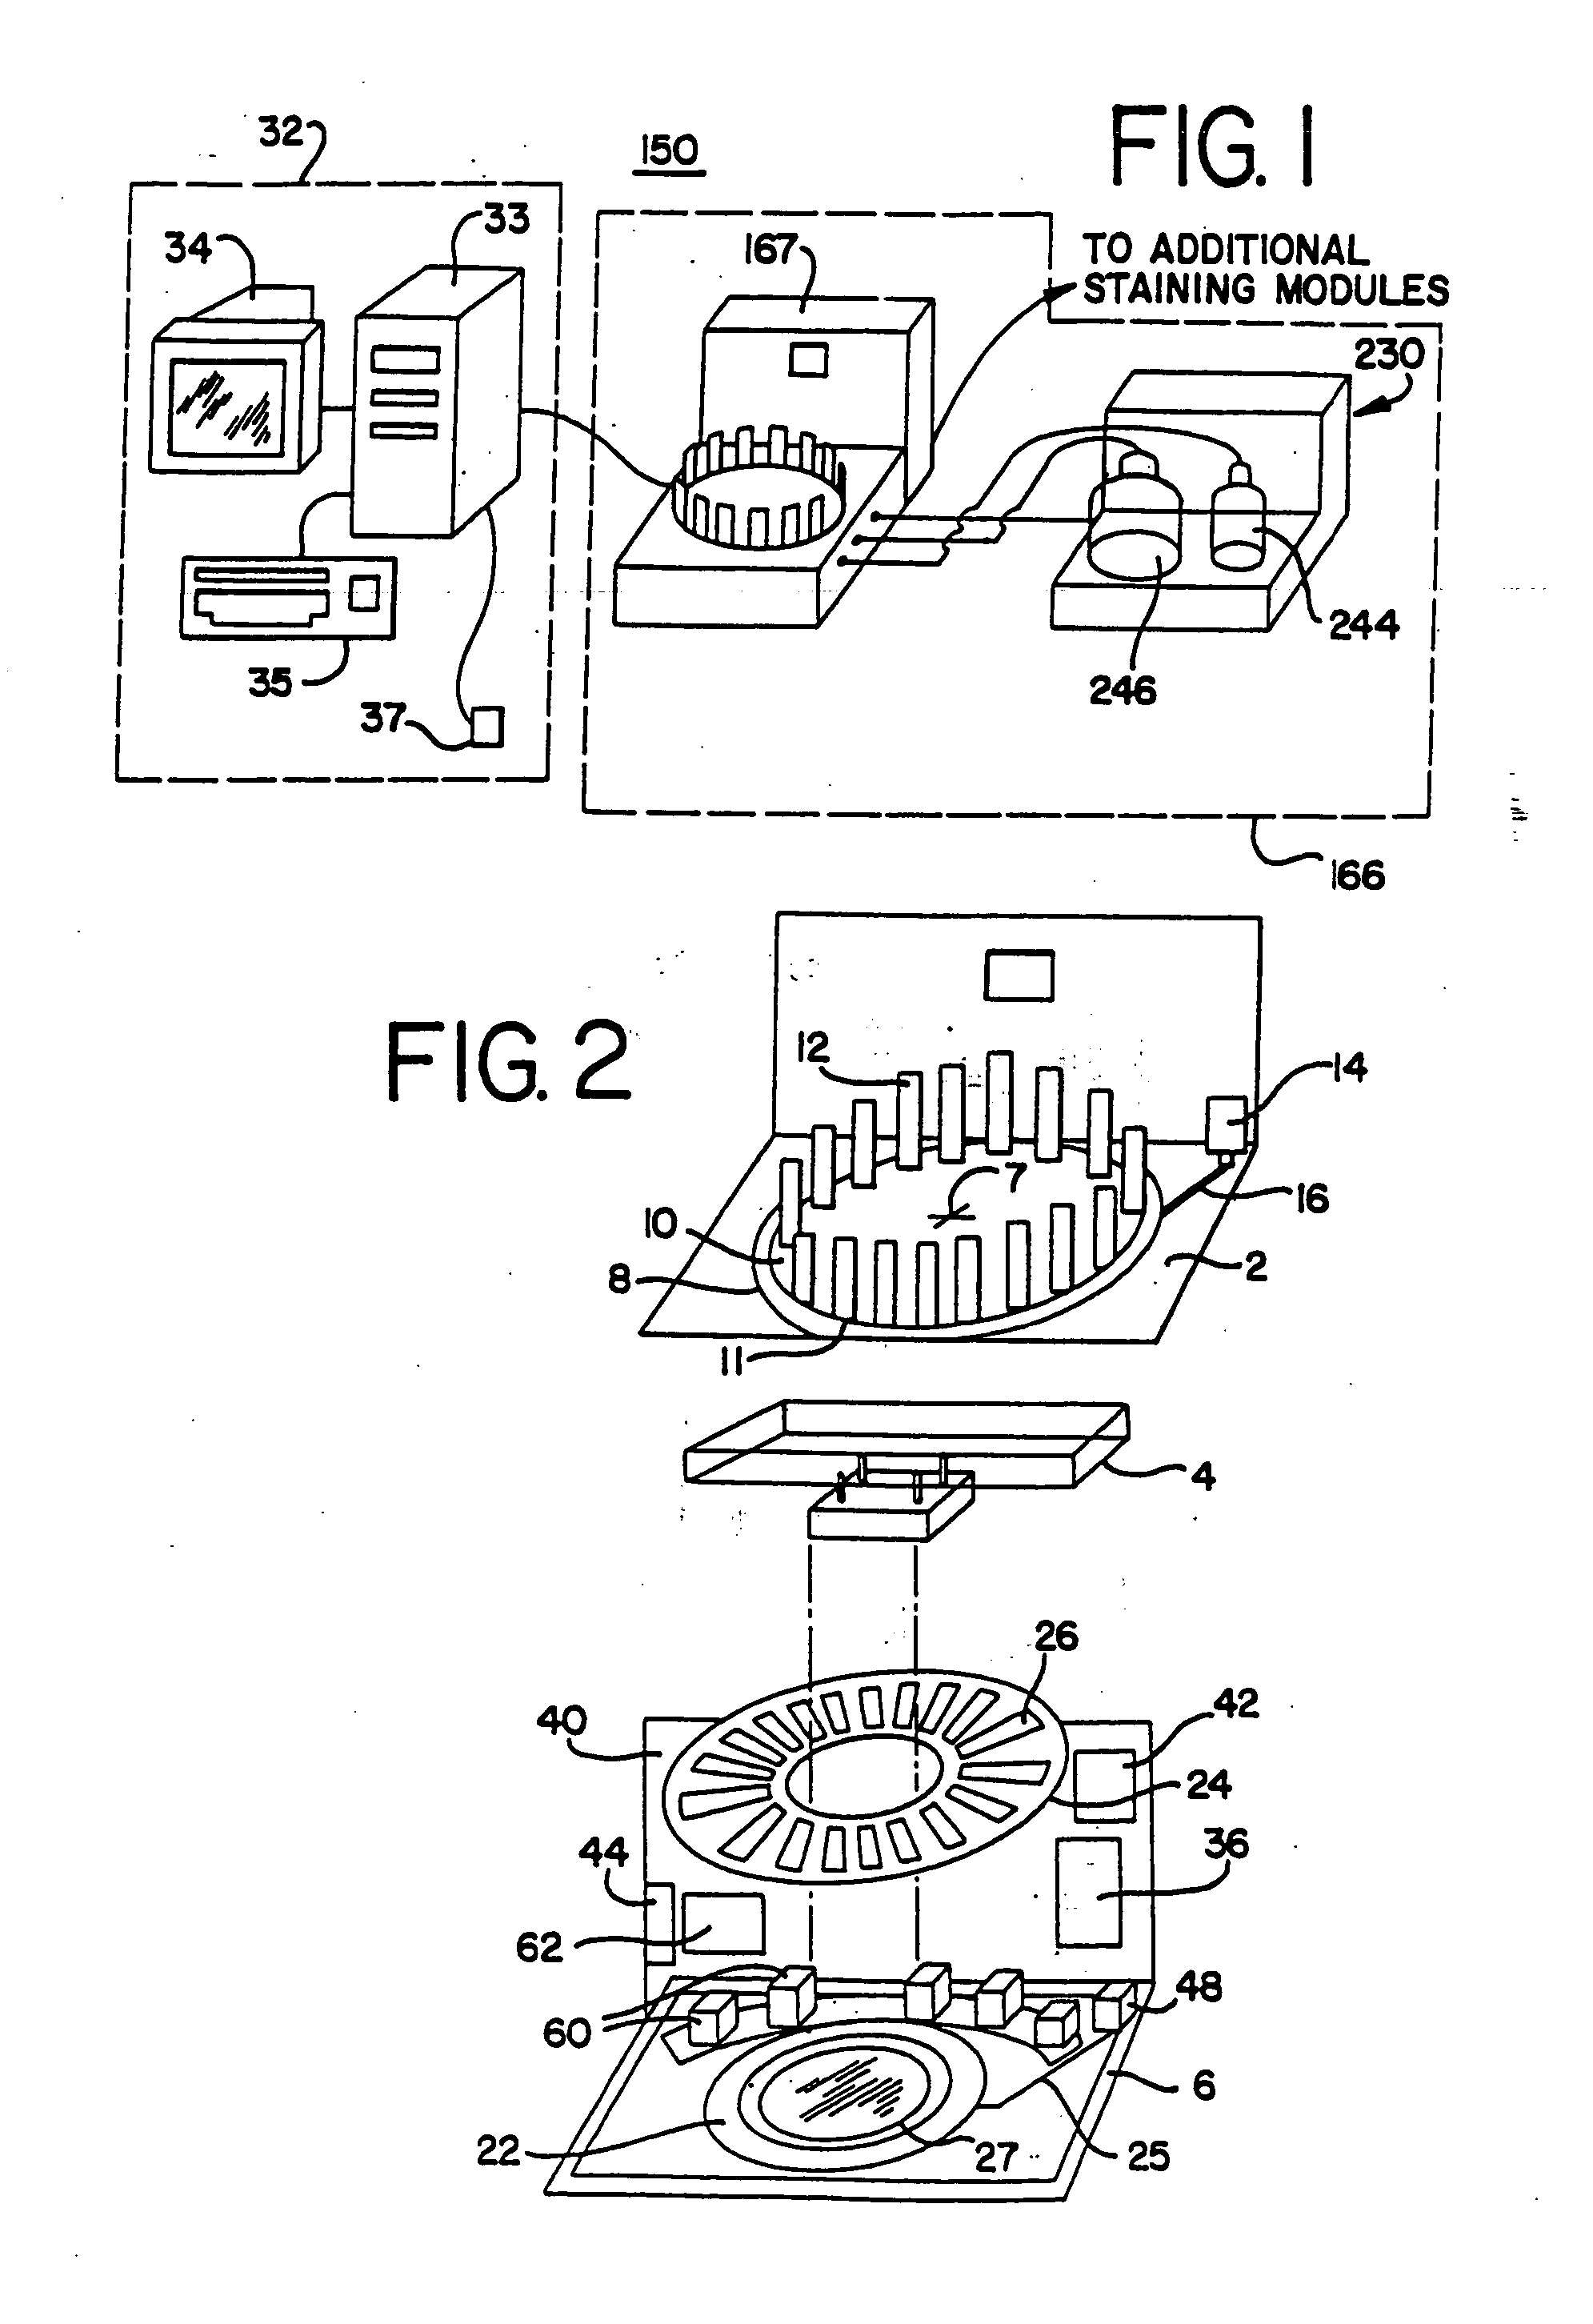 Method and apparatus for modifying pressure within a fluid dispenser